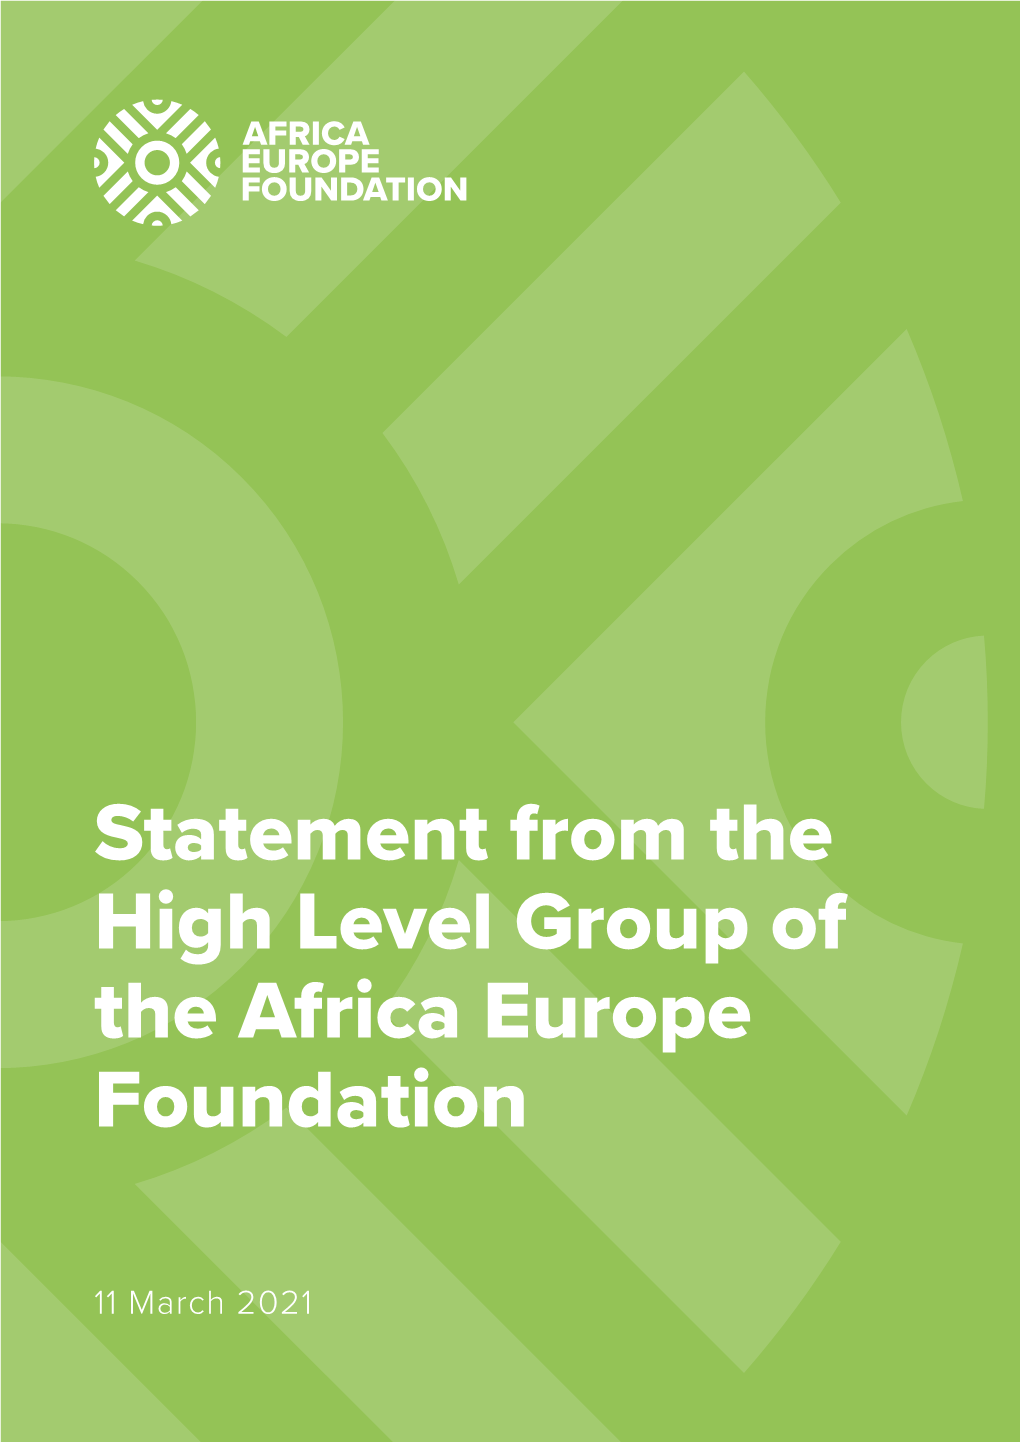 Statement from the High Level Group of the Africa Europe Foundation